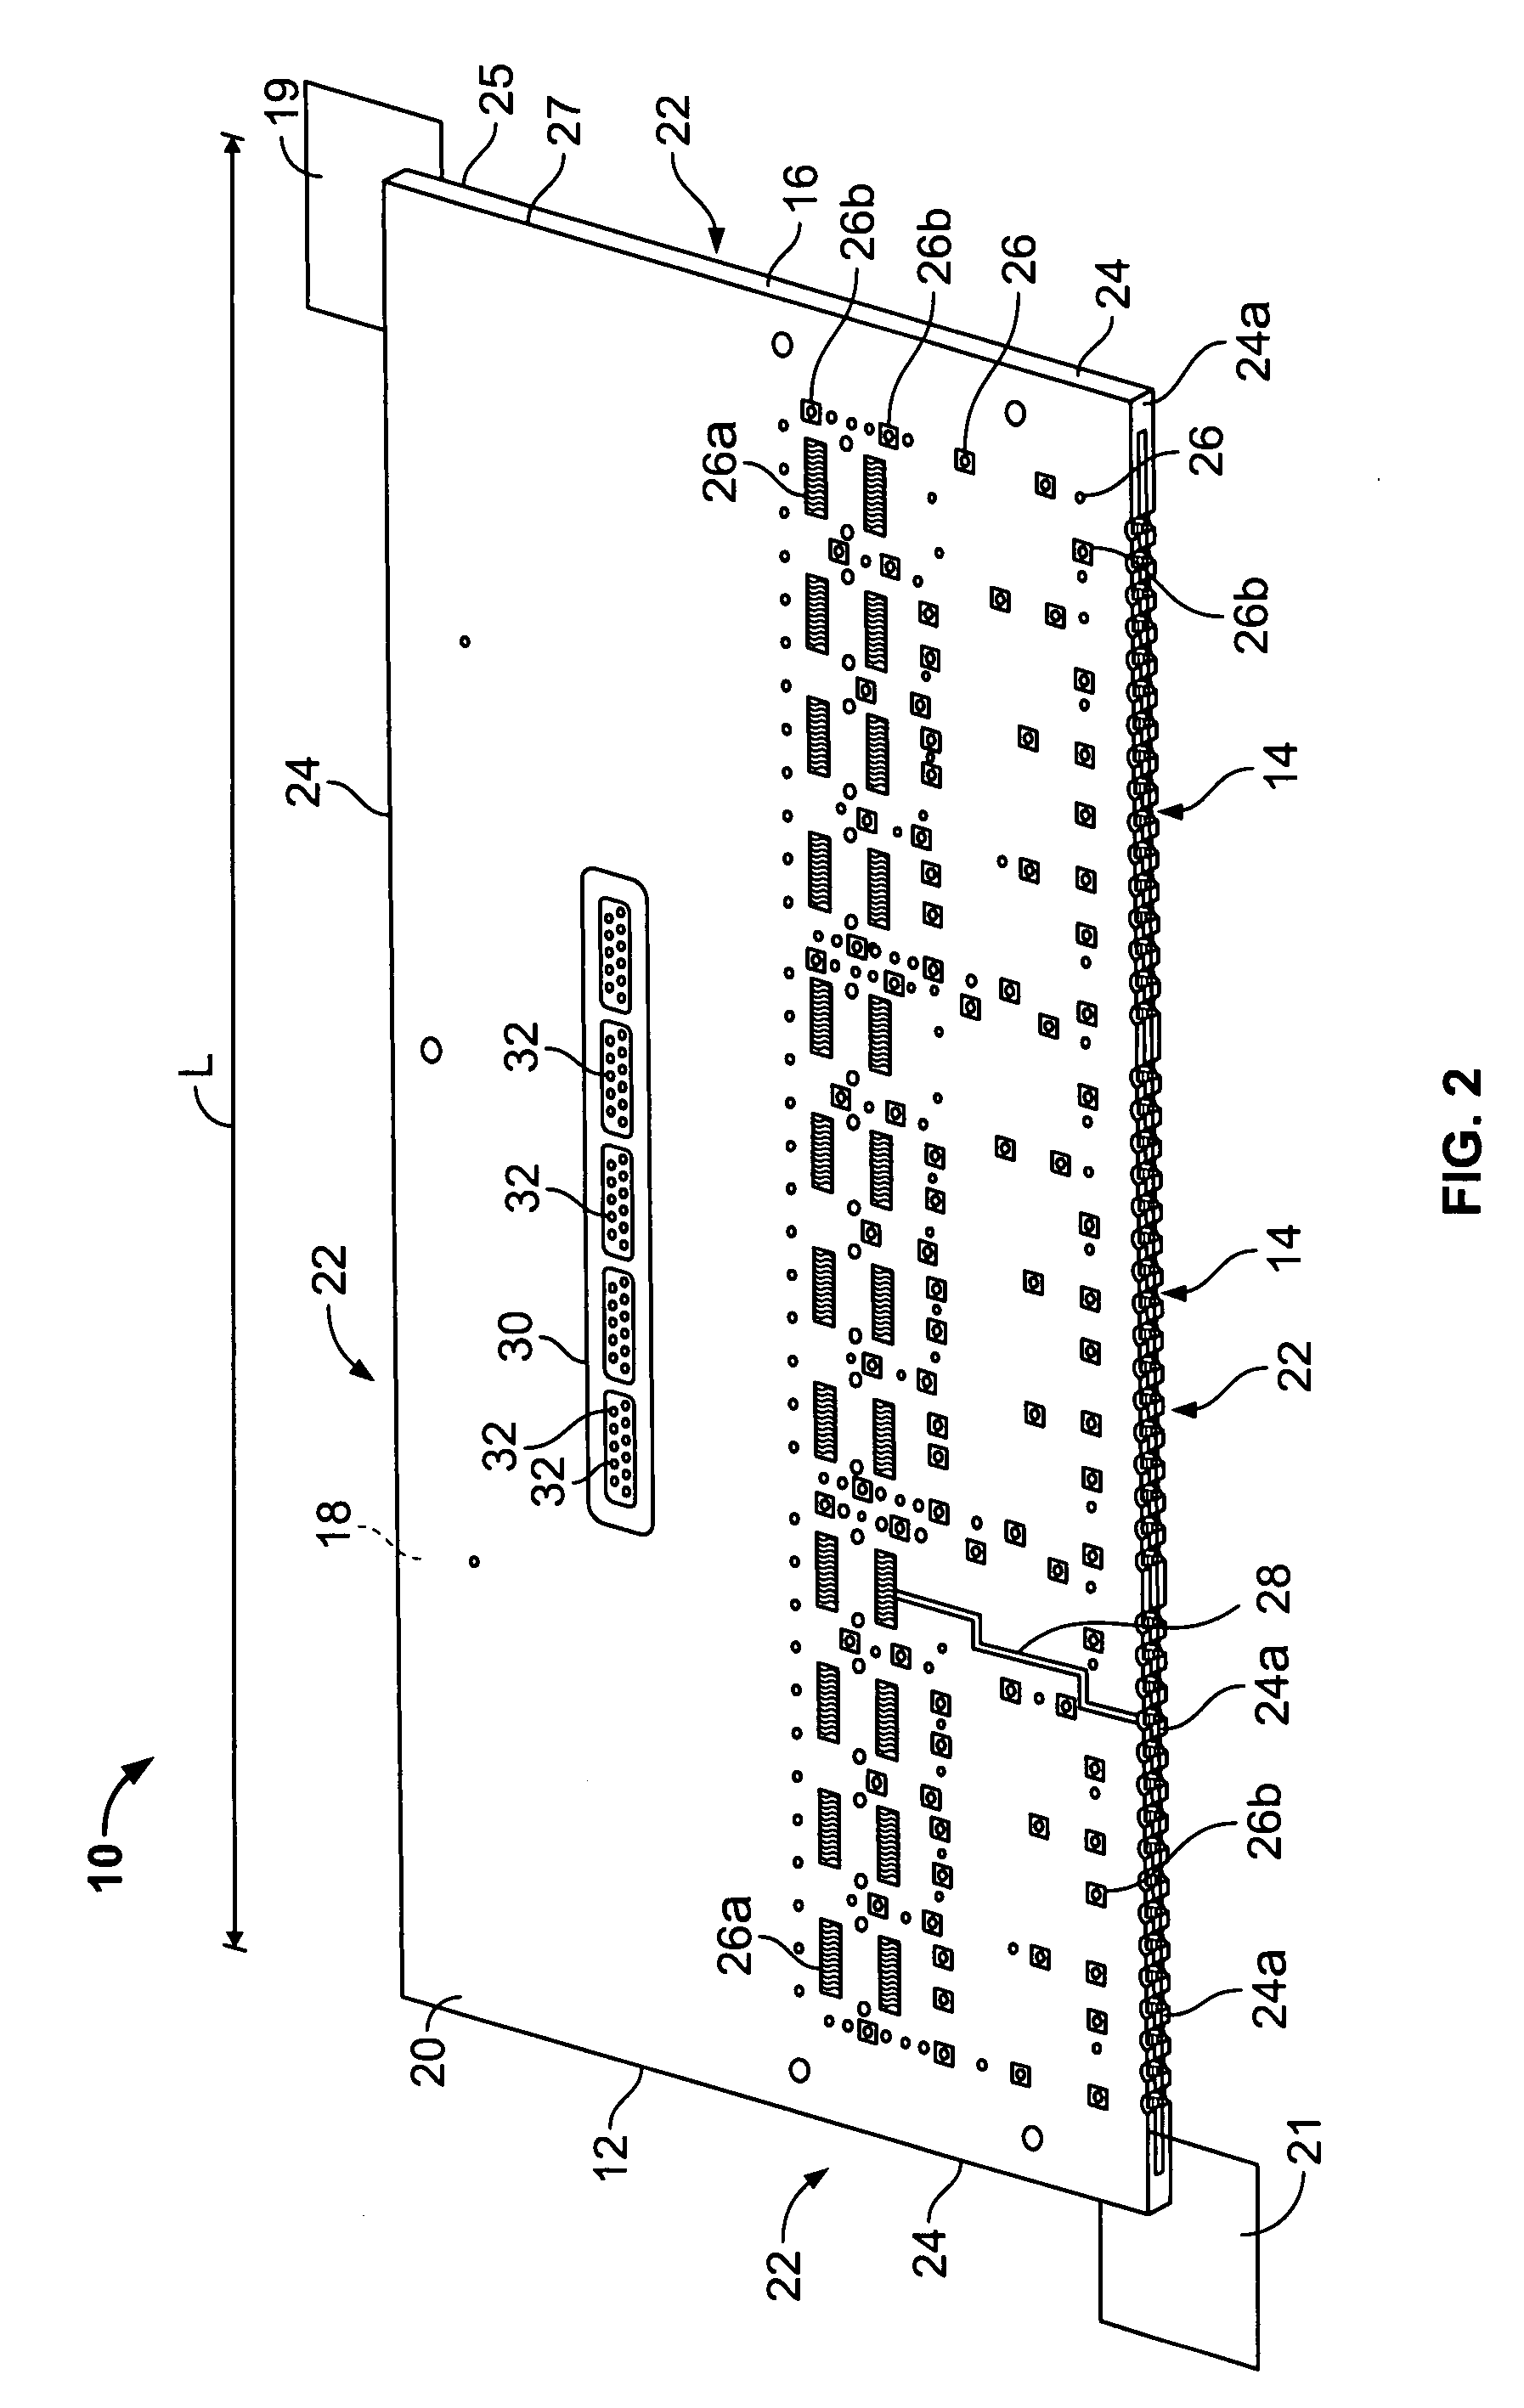 Circuit board assembly with light emitting element